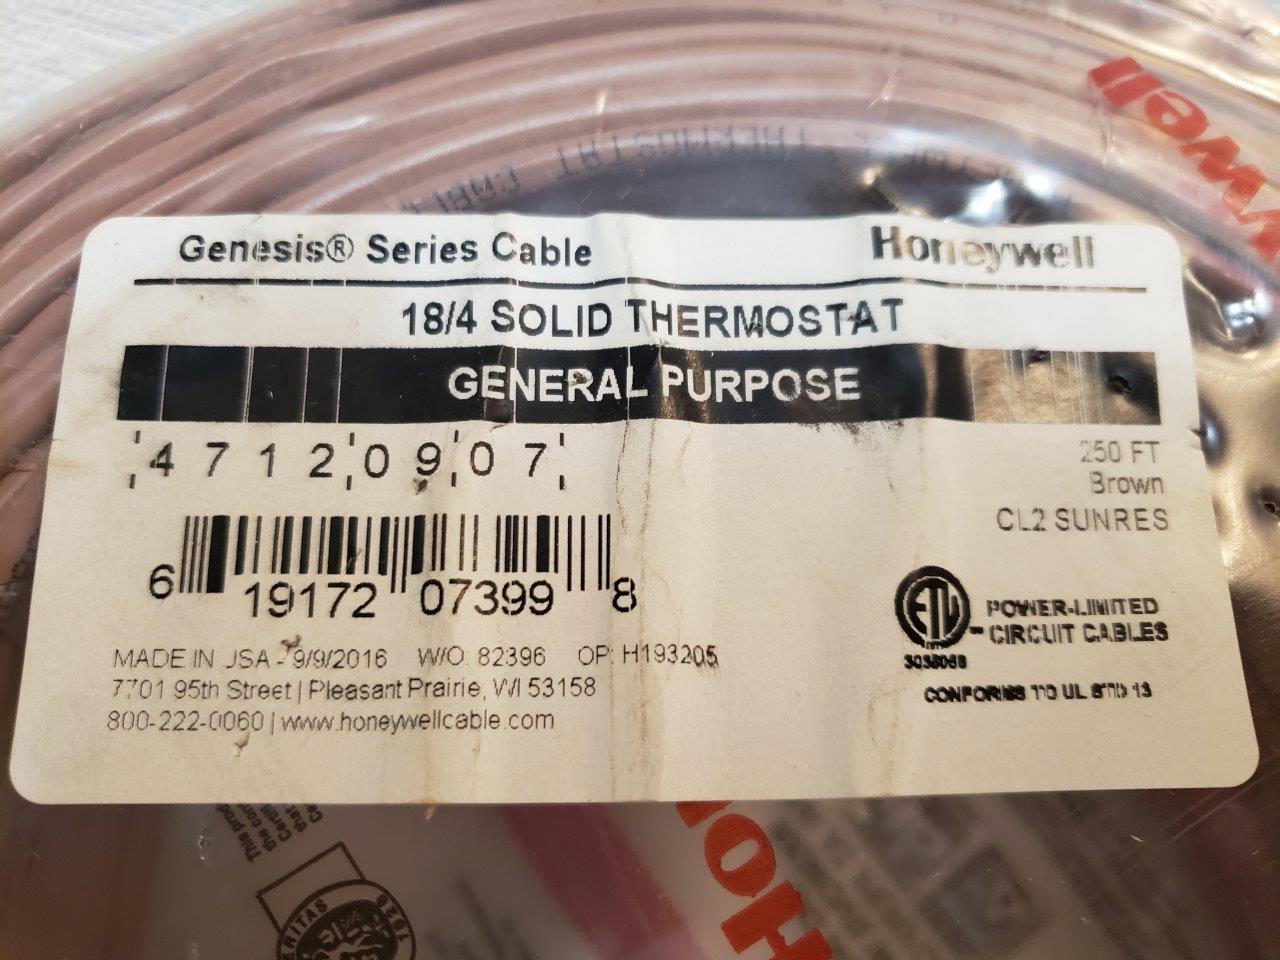 Thermostat wire cable 250ft 18/4 250 ft feet foot Honeywell Genesis 47140907